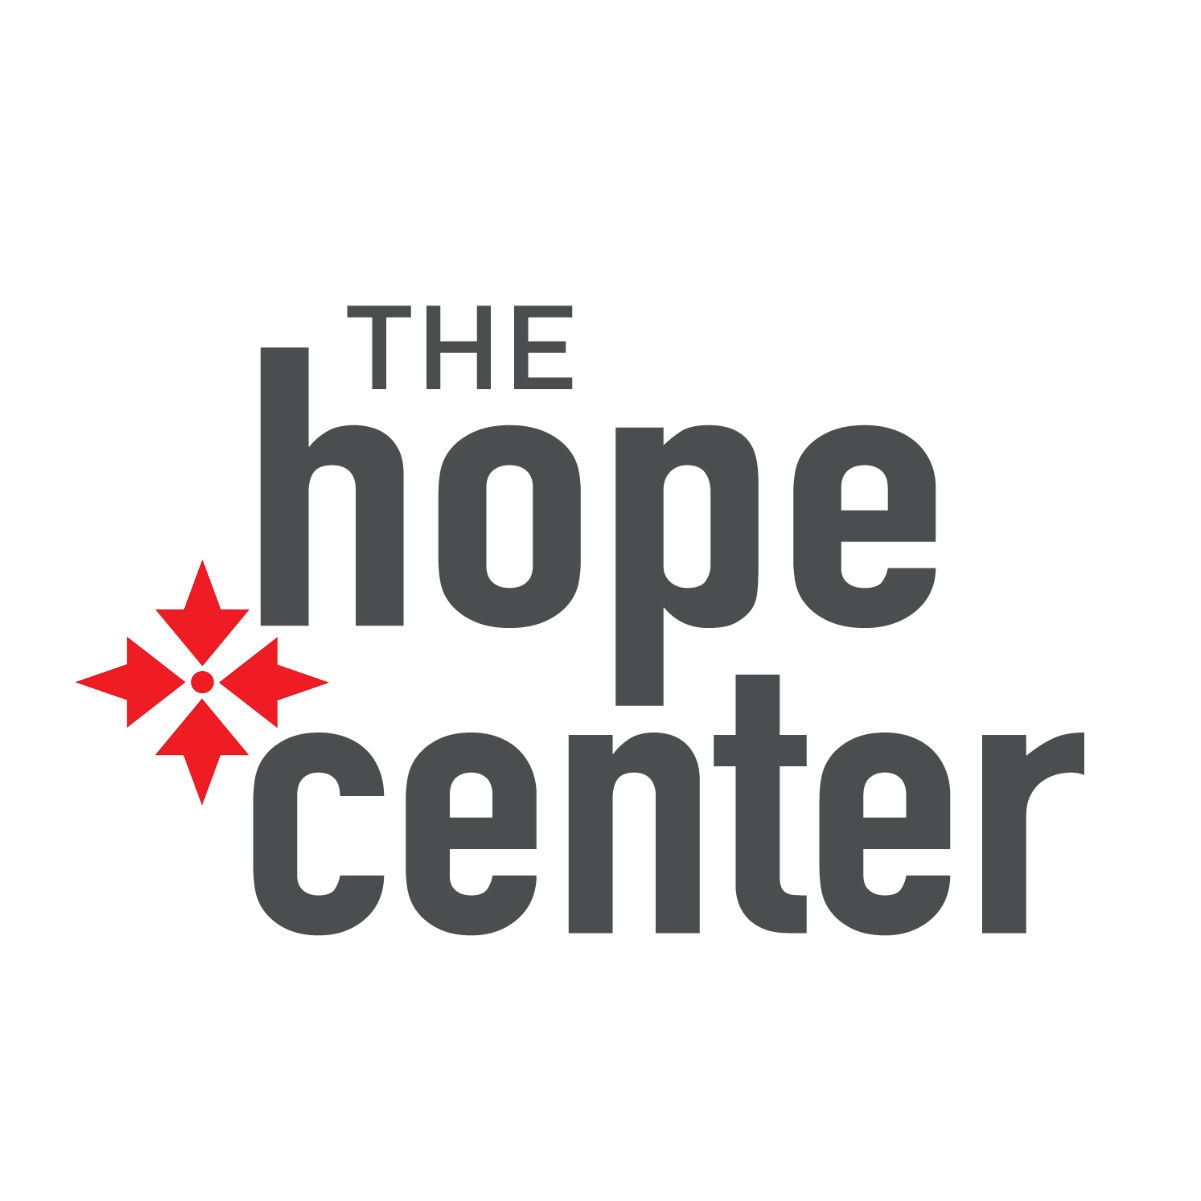 The Hope Center at Hagerstown Rescue Mission